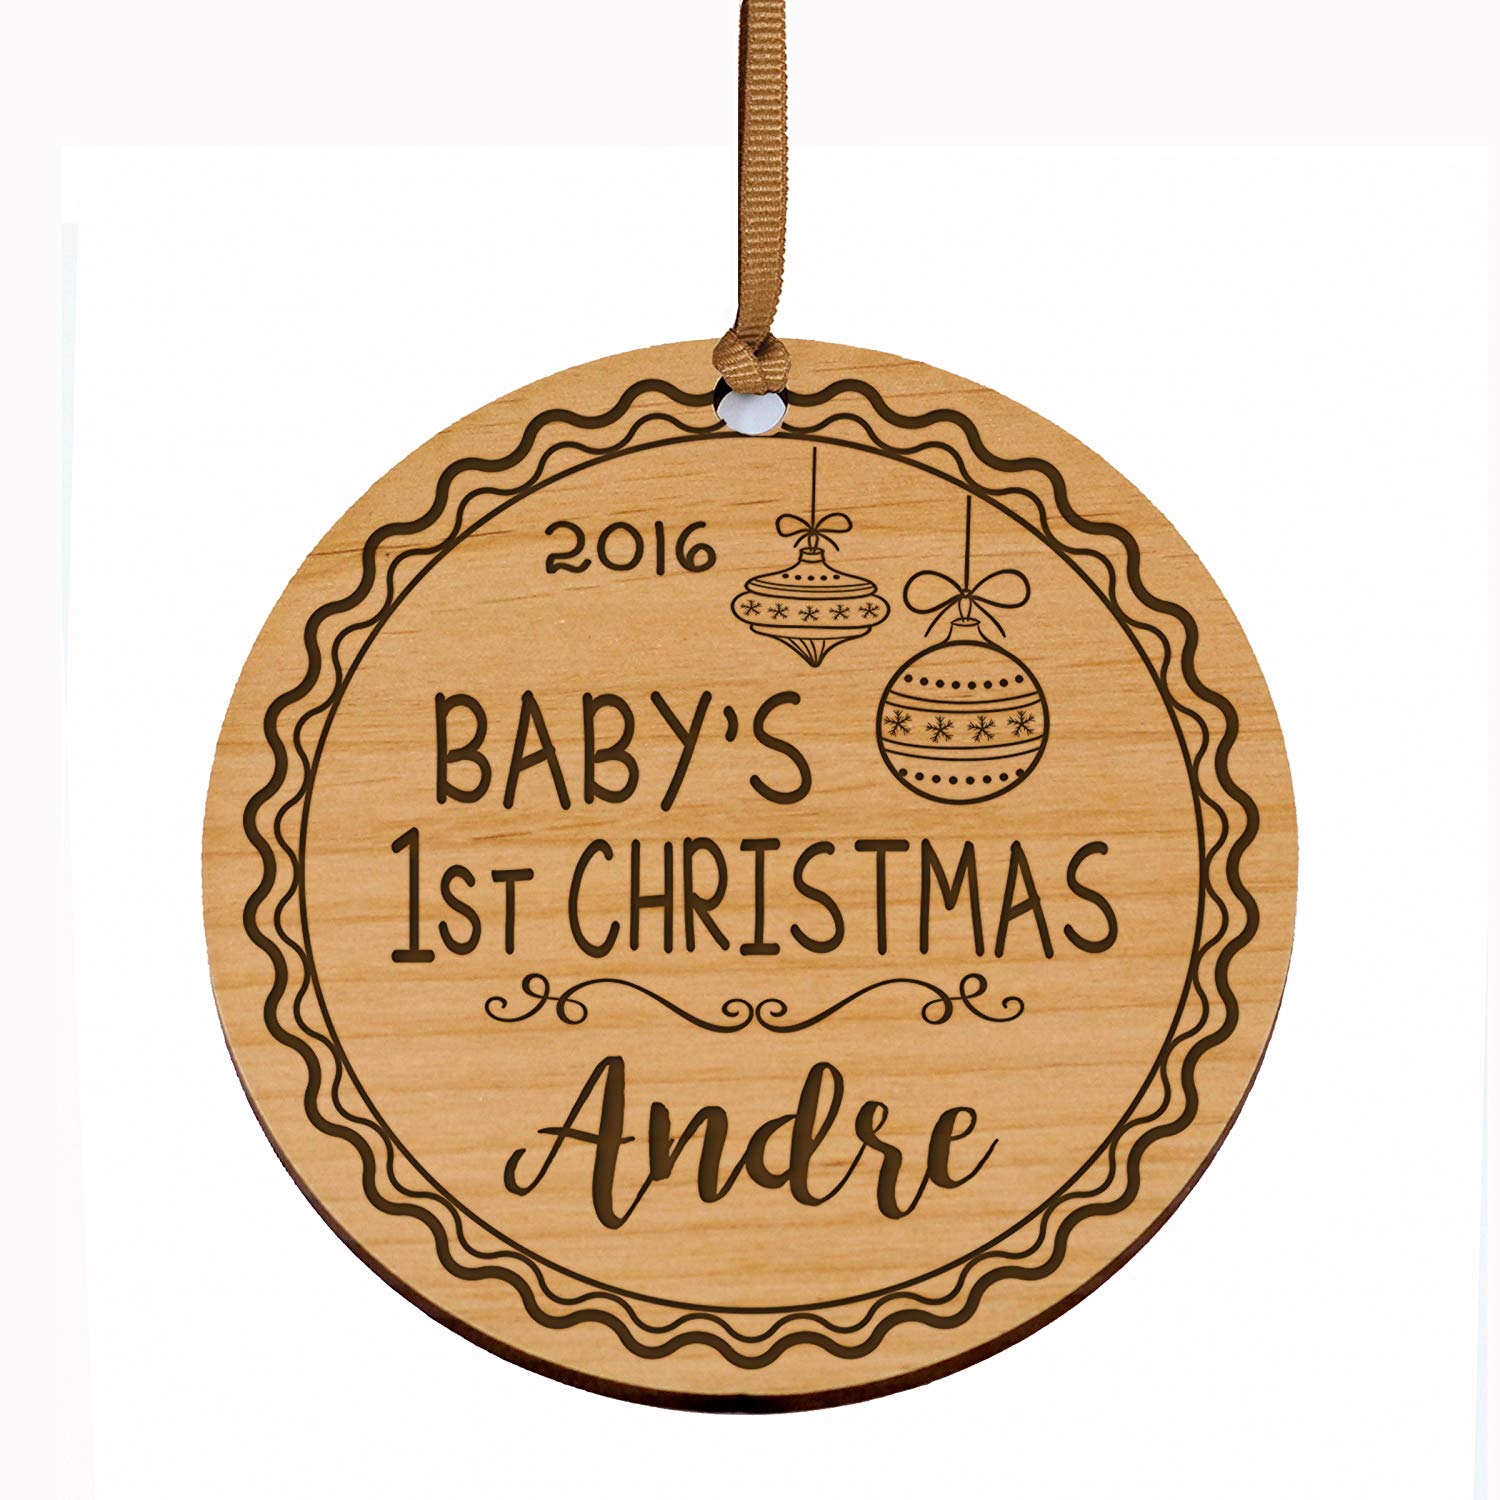 Personalized Baby's First Christmas Ornament - Baby's 1st Christmas - LifeSong Milestones